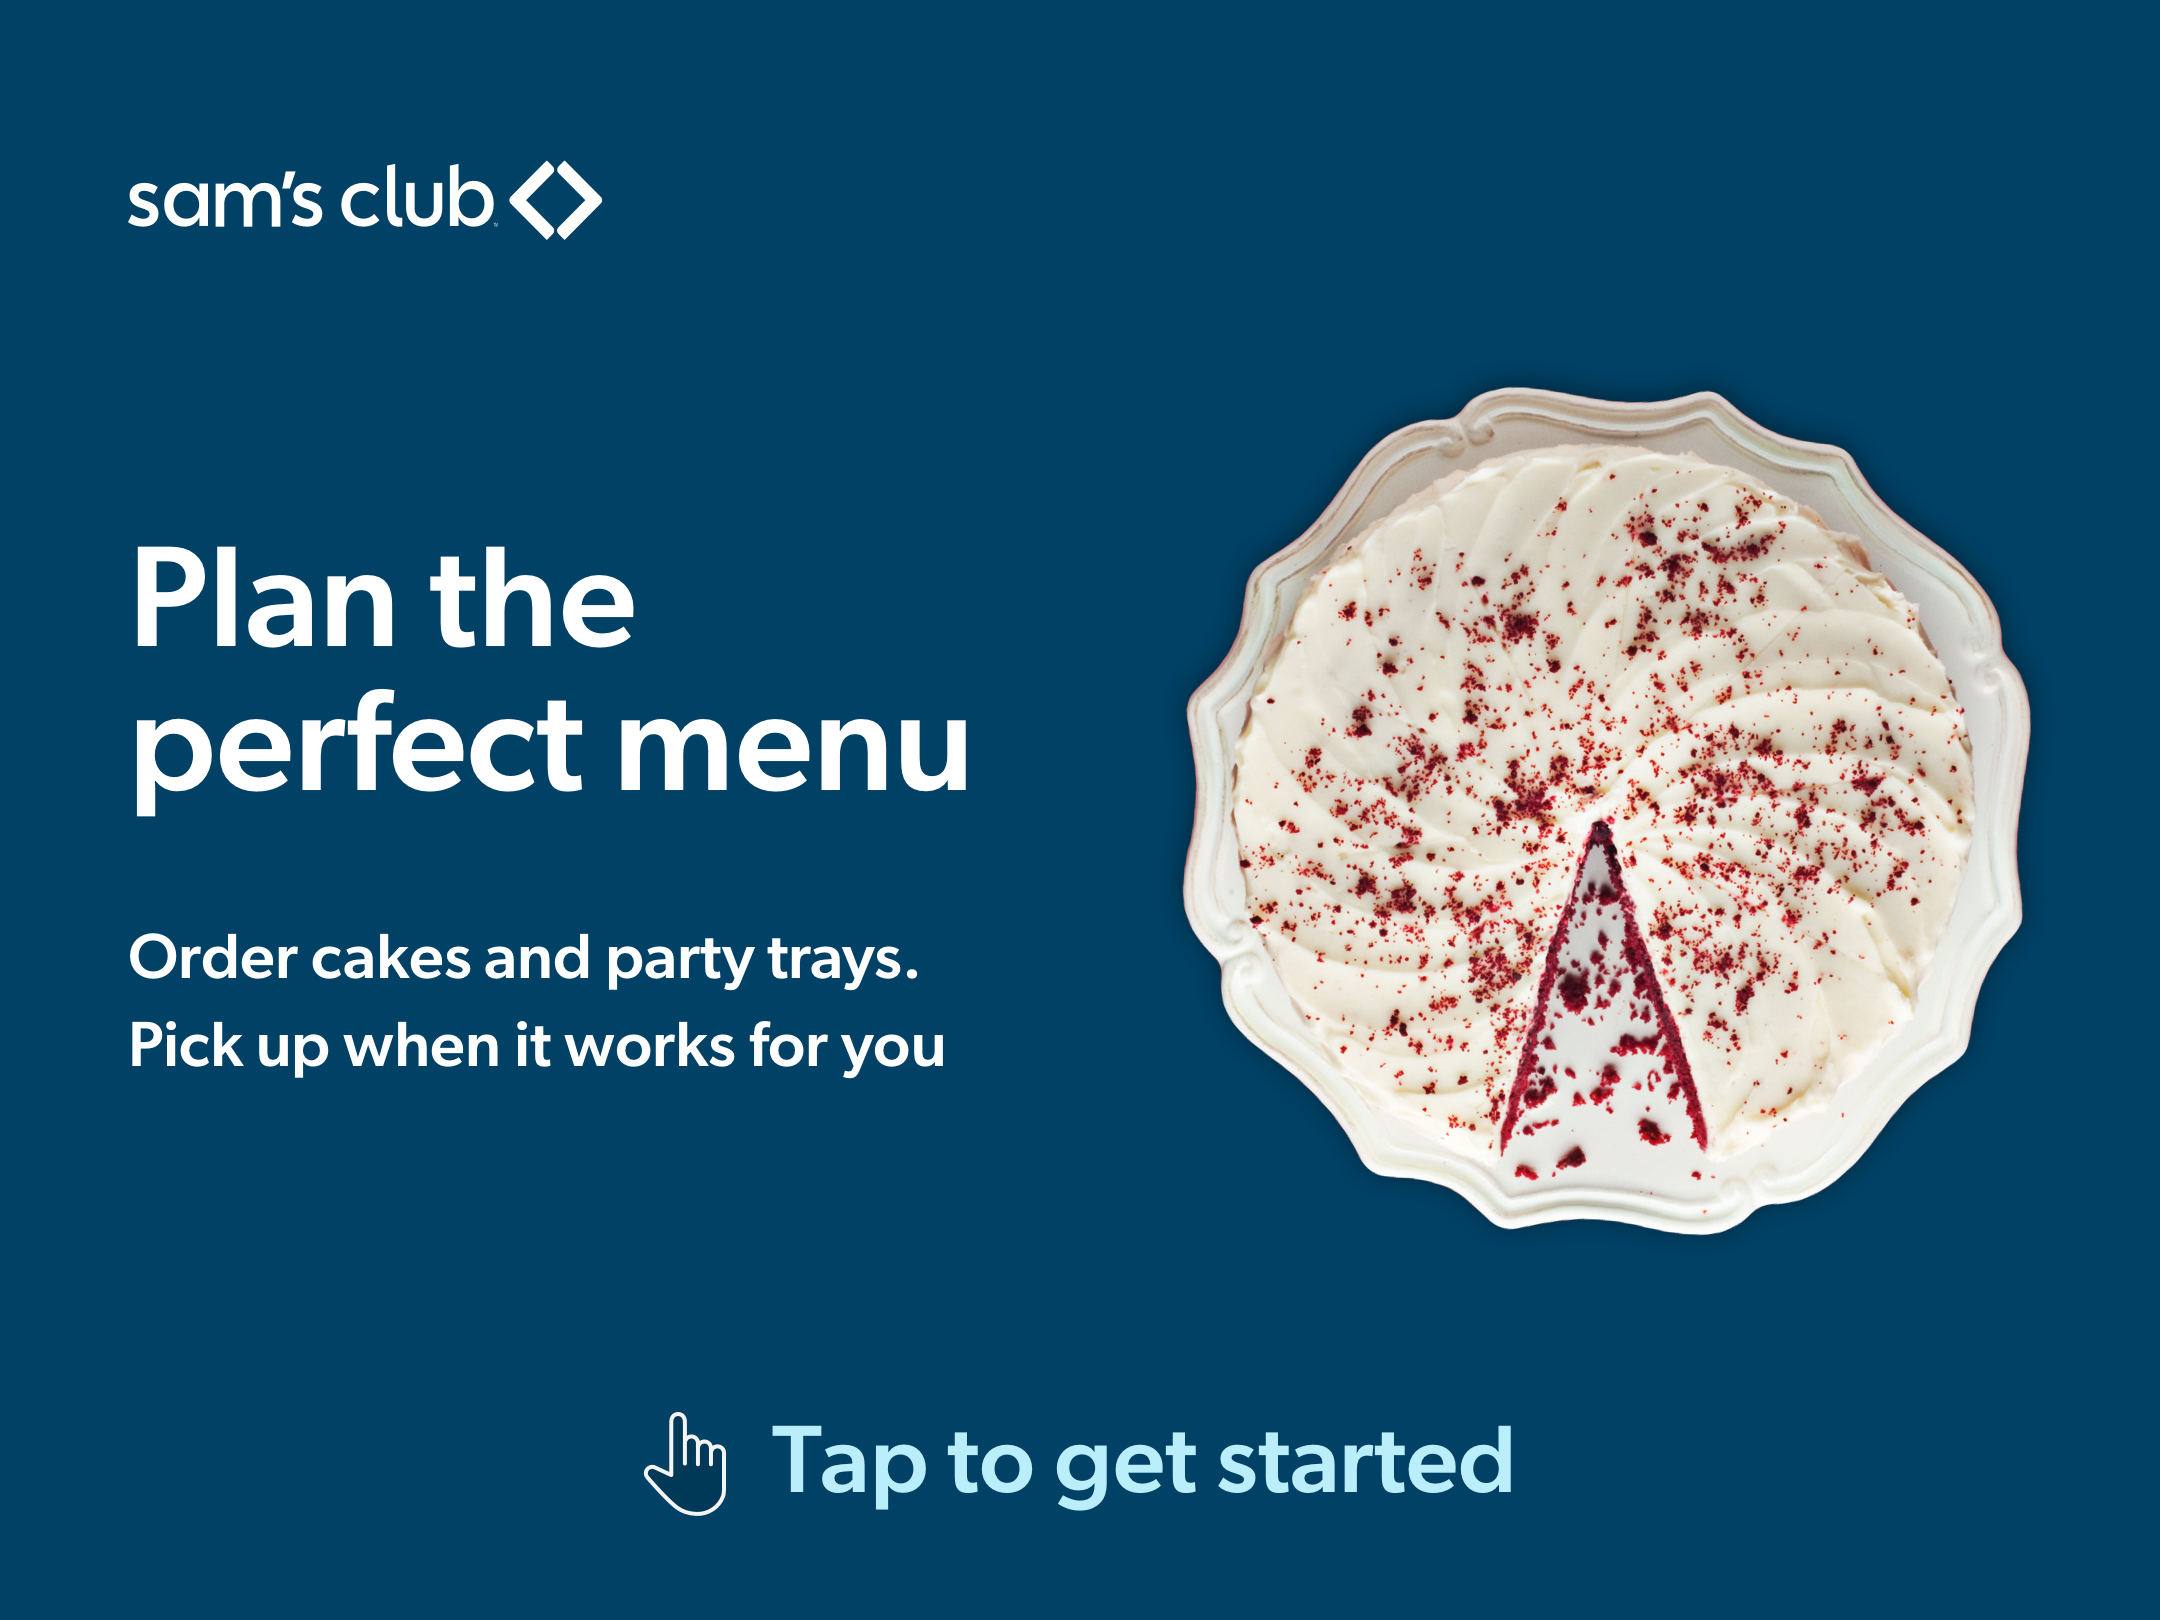 Bakery kiosk landing page: Plan the perfect menu. Order cakes and party trays. Pick up when it works for you.